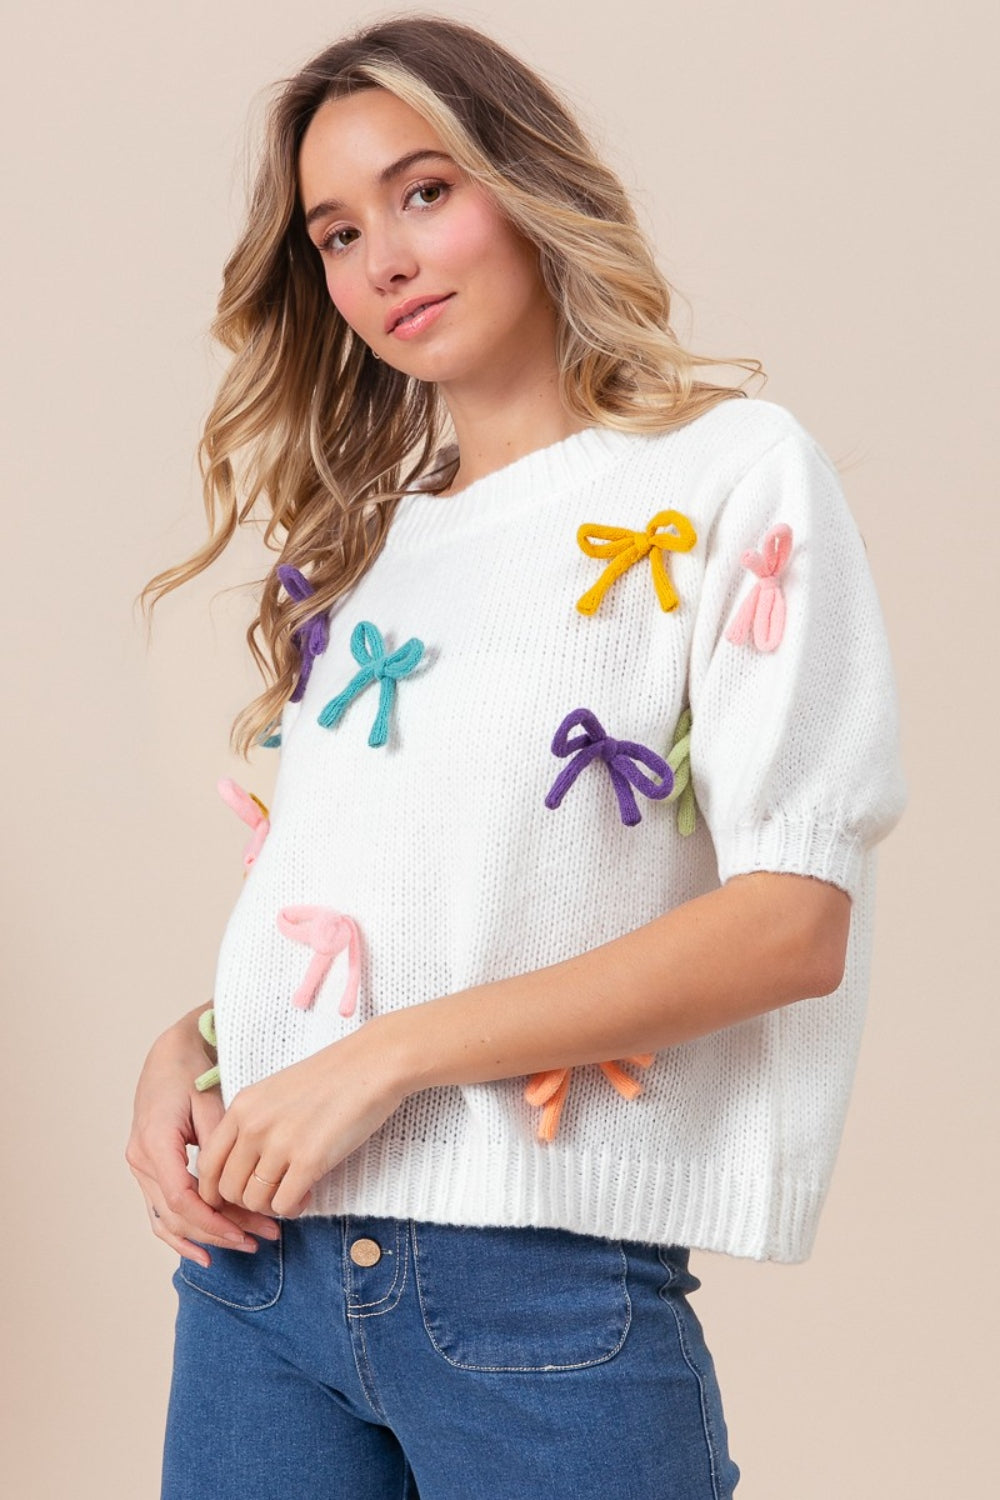 Whoopsie Daisy-BiBi Bow Detail Puff Sleeve Sweater-Whoopsie Daisy